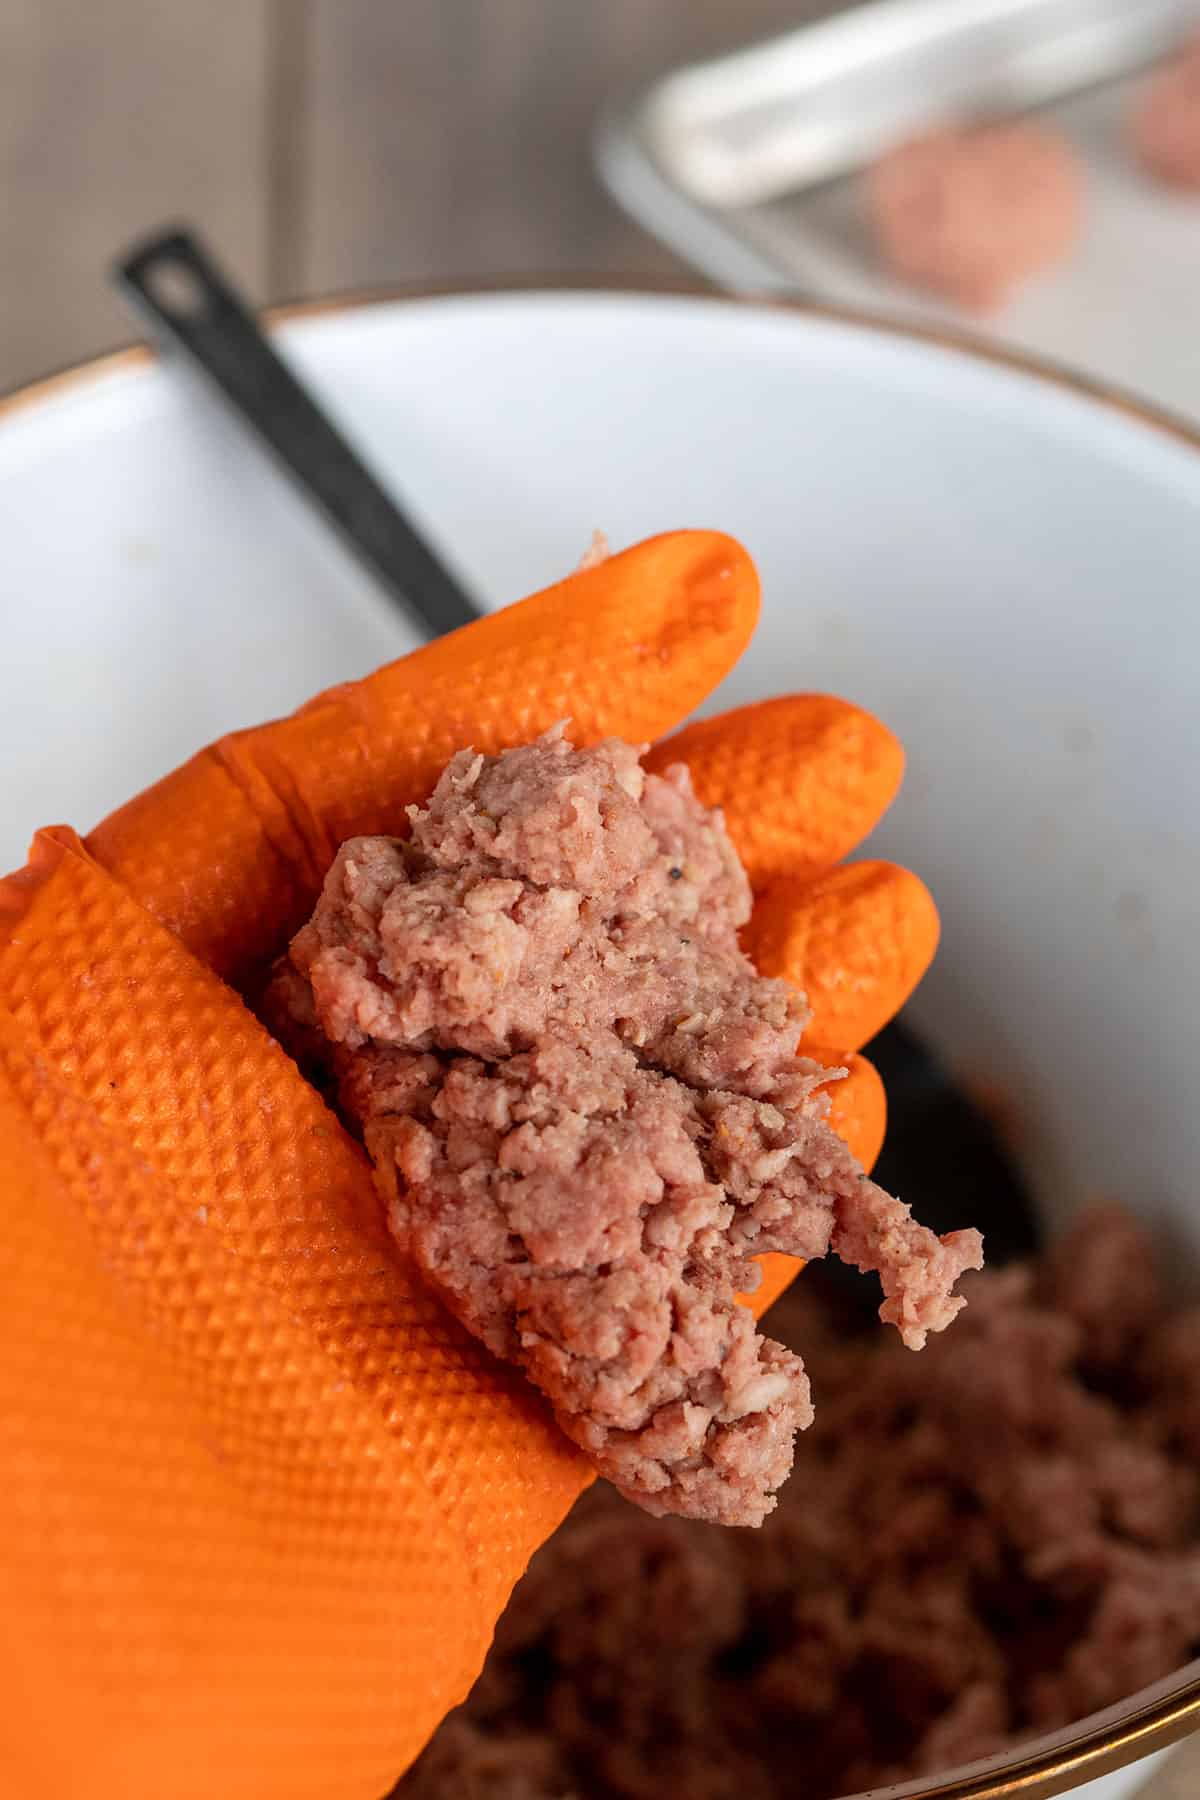 holding a handful of ground beef.